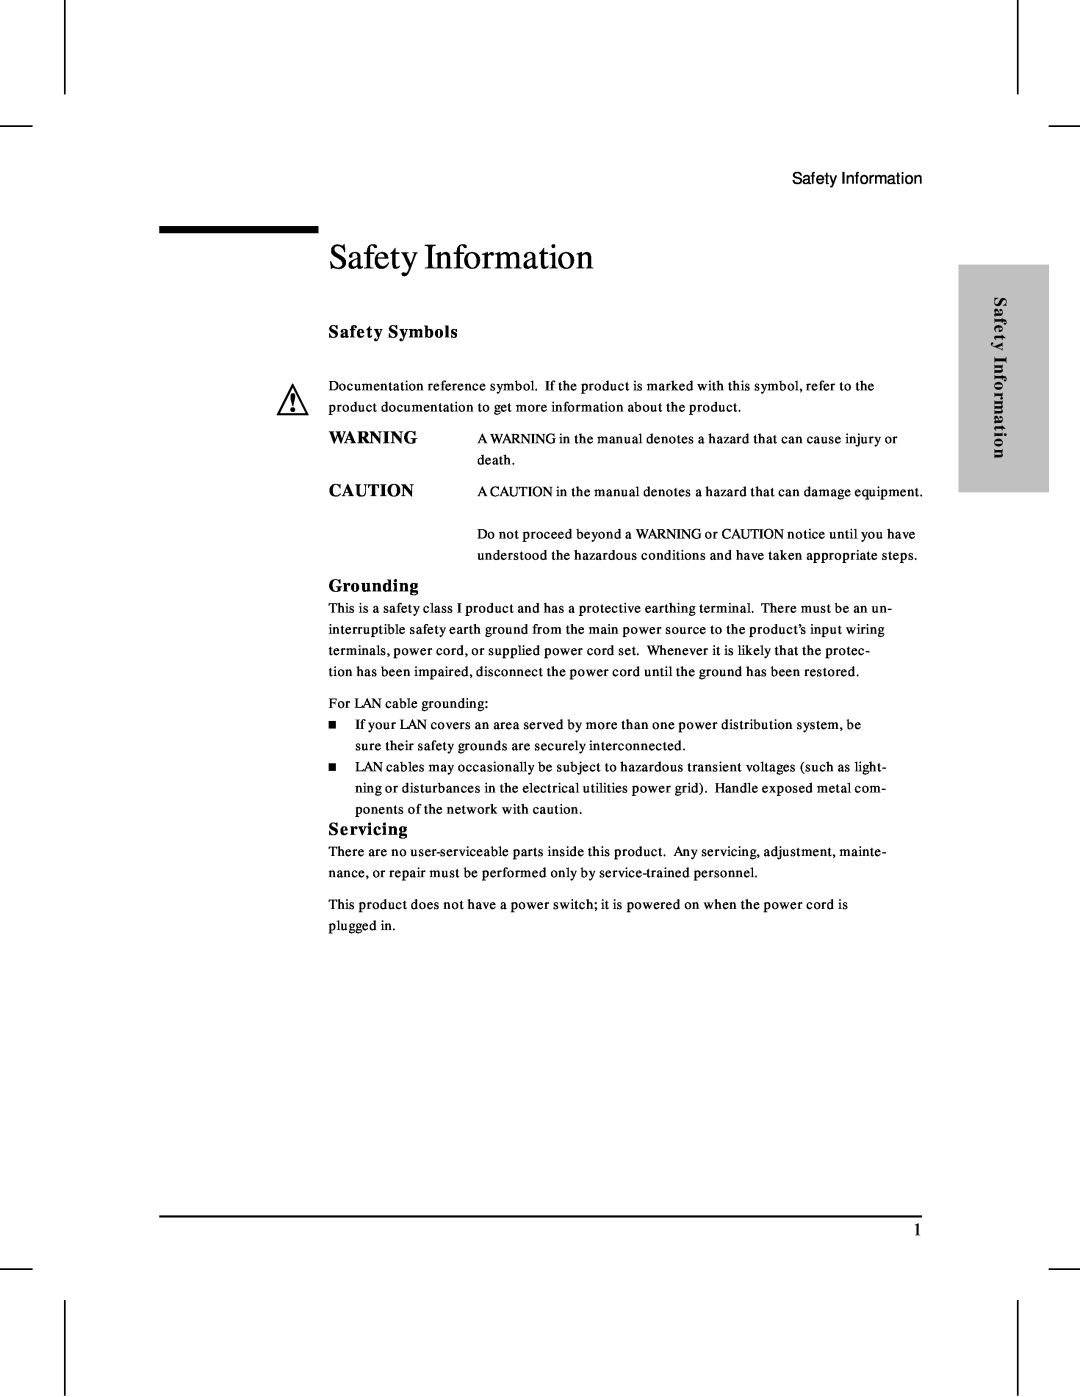 HP 480 manual Safety Information, Safety Symbols, Grounding, Servicing 